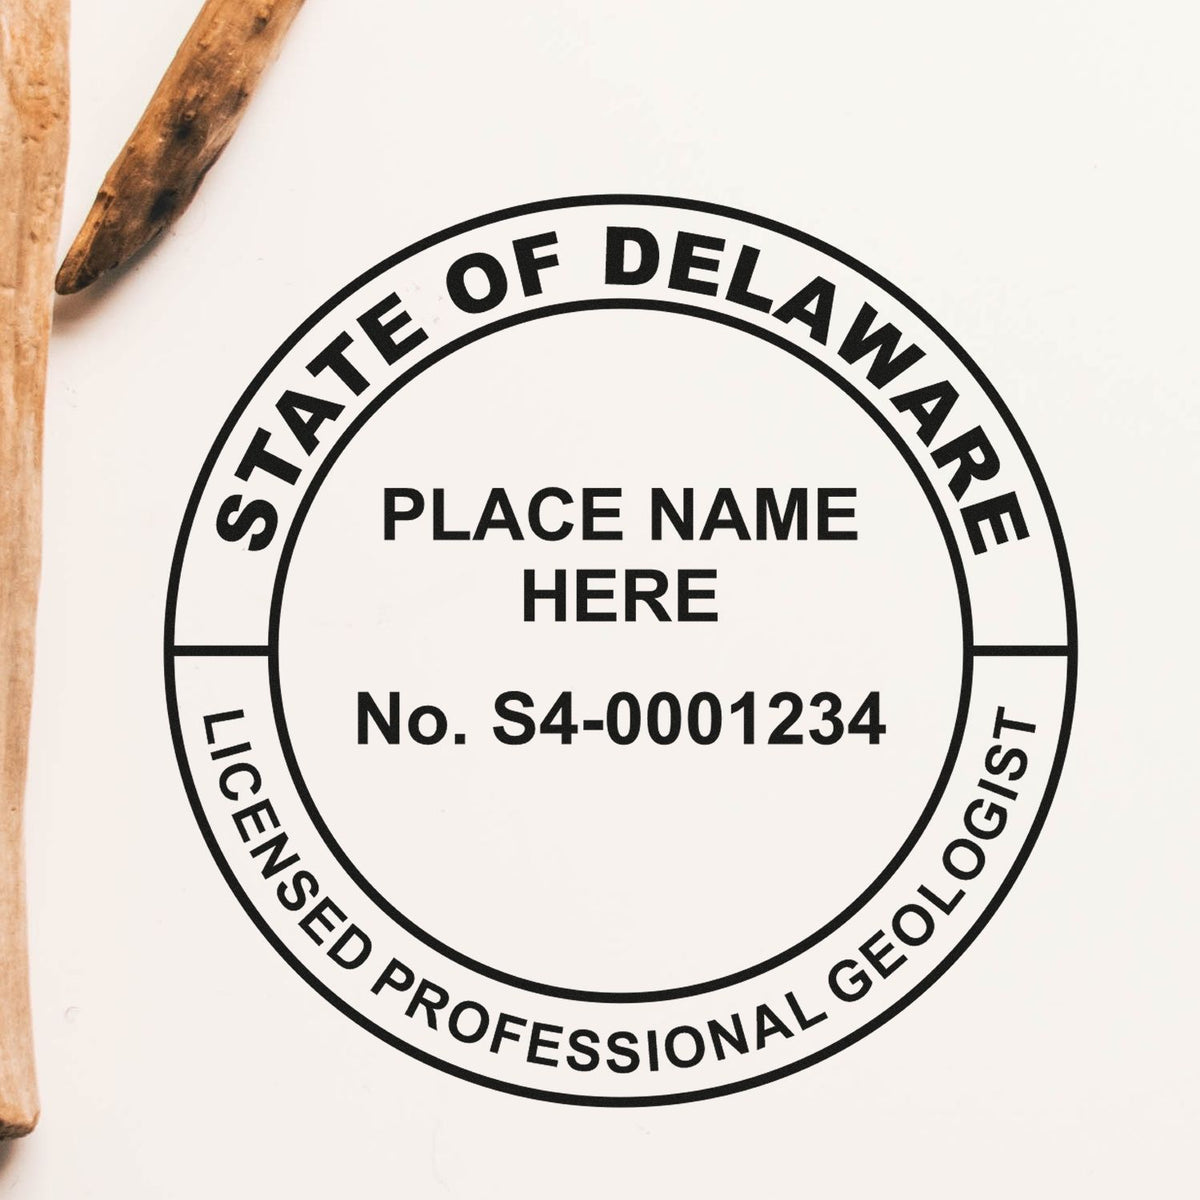 A photograph of the Delaware Professional Geologist Seal Stamp stamp impression reveals a vivid, professional image of the on paper.